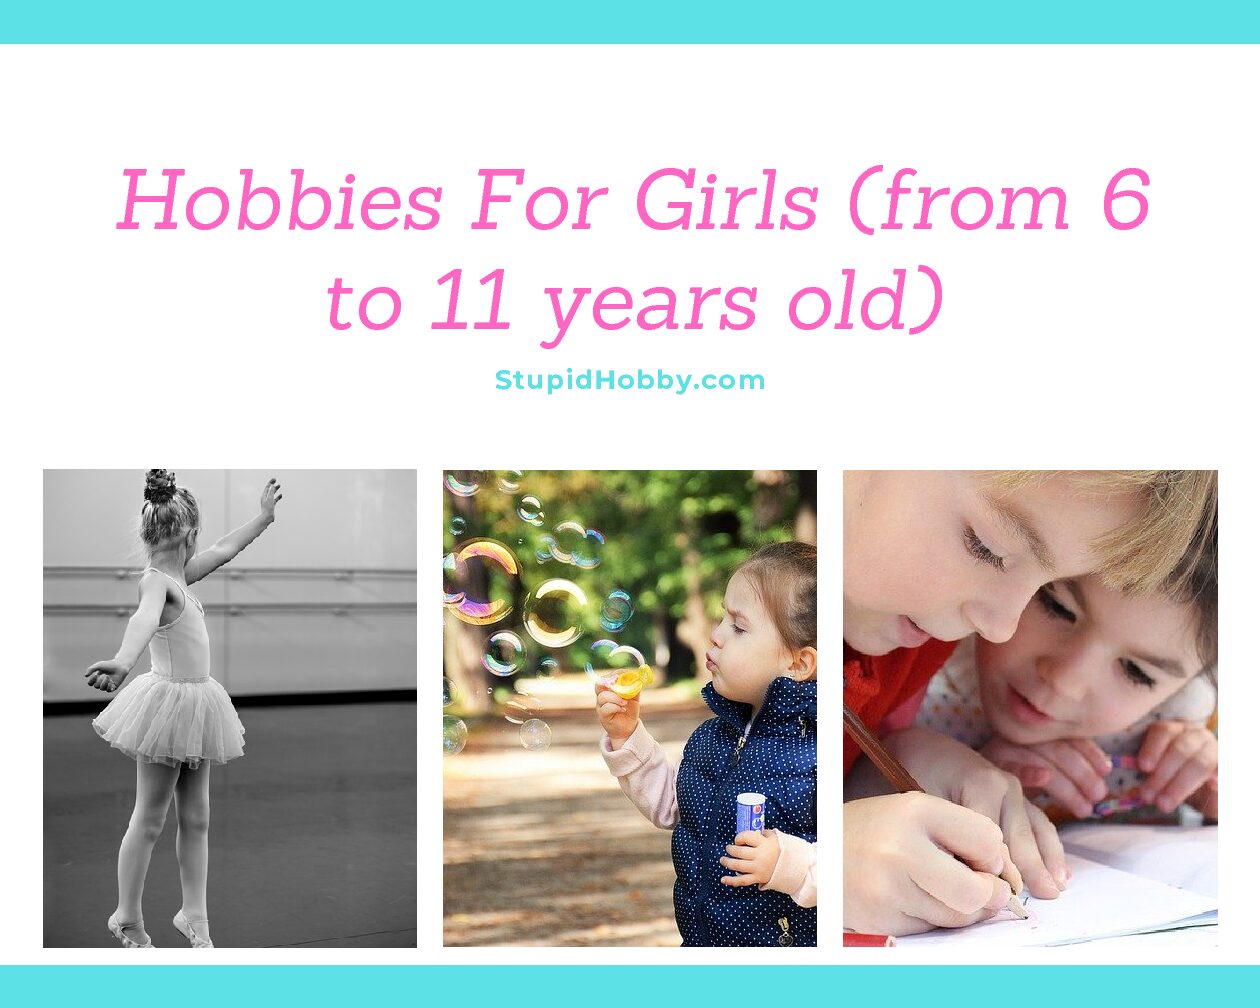 Hobbies For Girls (from 6 to 11 years old)